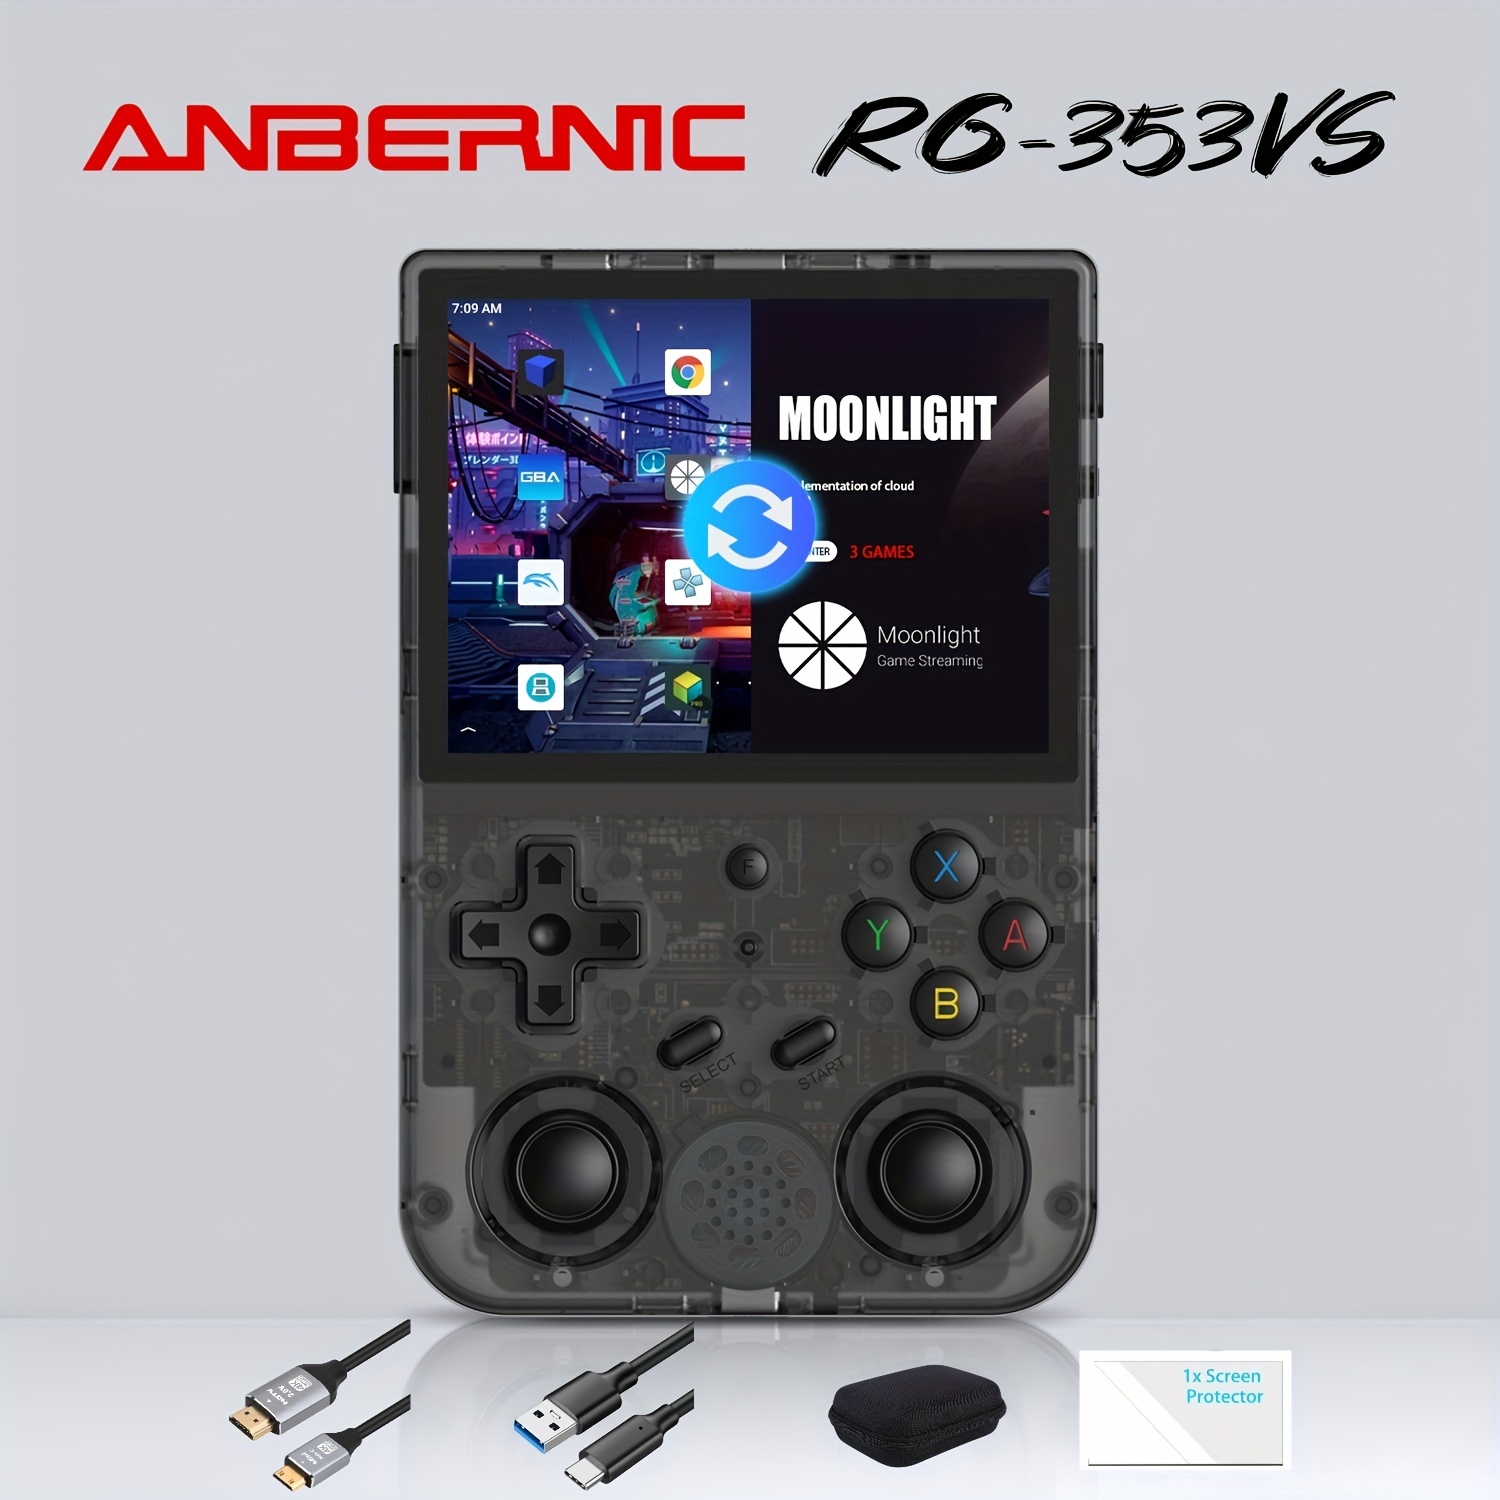 Value Package]anbernic Rg353vs Handheld Game Console Linux System